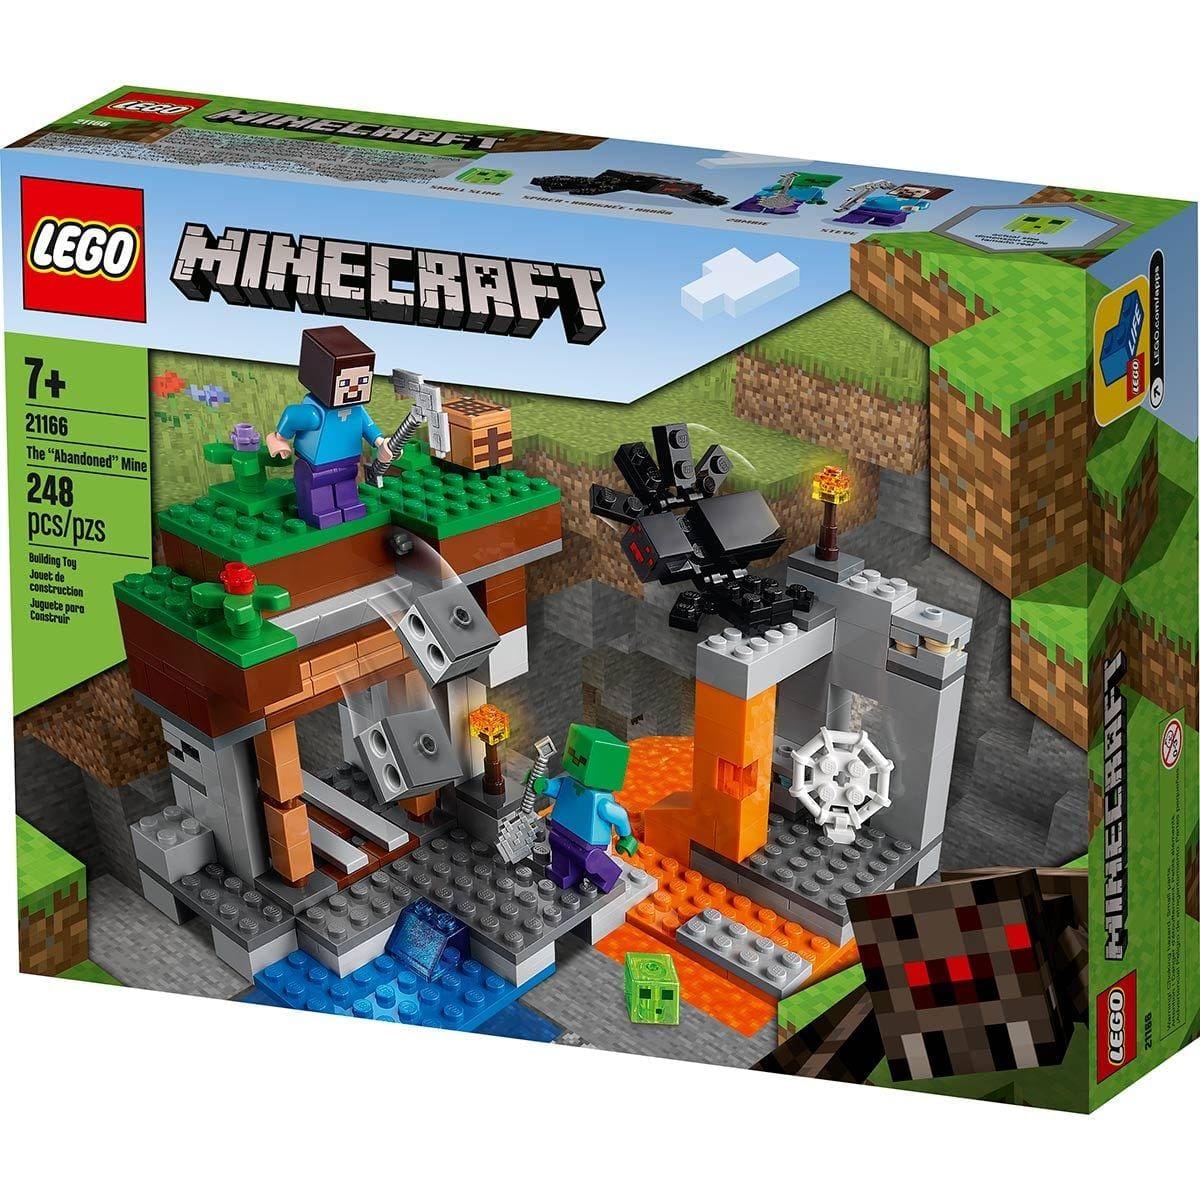 Svaghed Smitsom sygdom Maleri Buy Abandoned Mine, Lego Minecraft, Ages 7+ - Party Expert